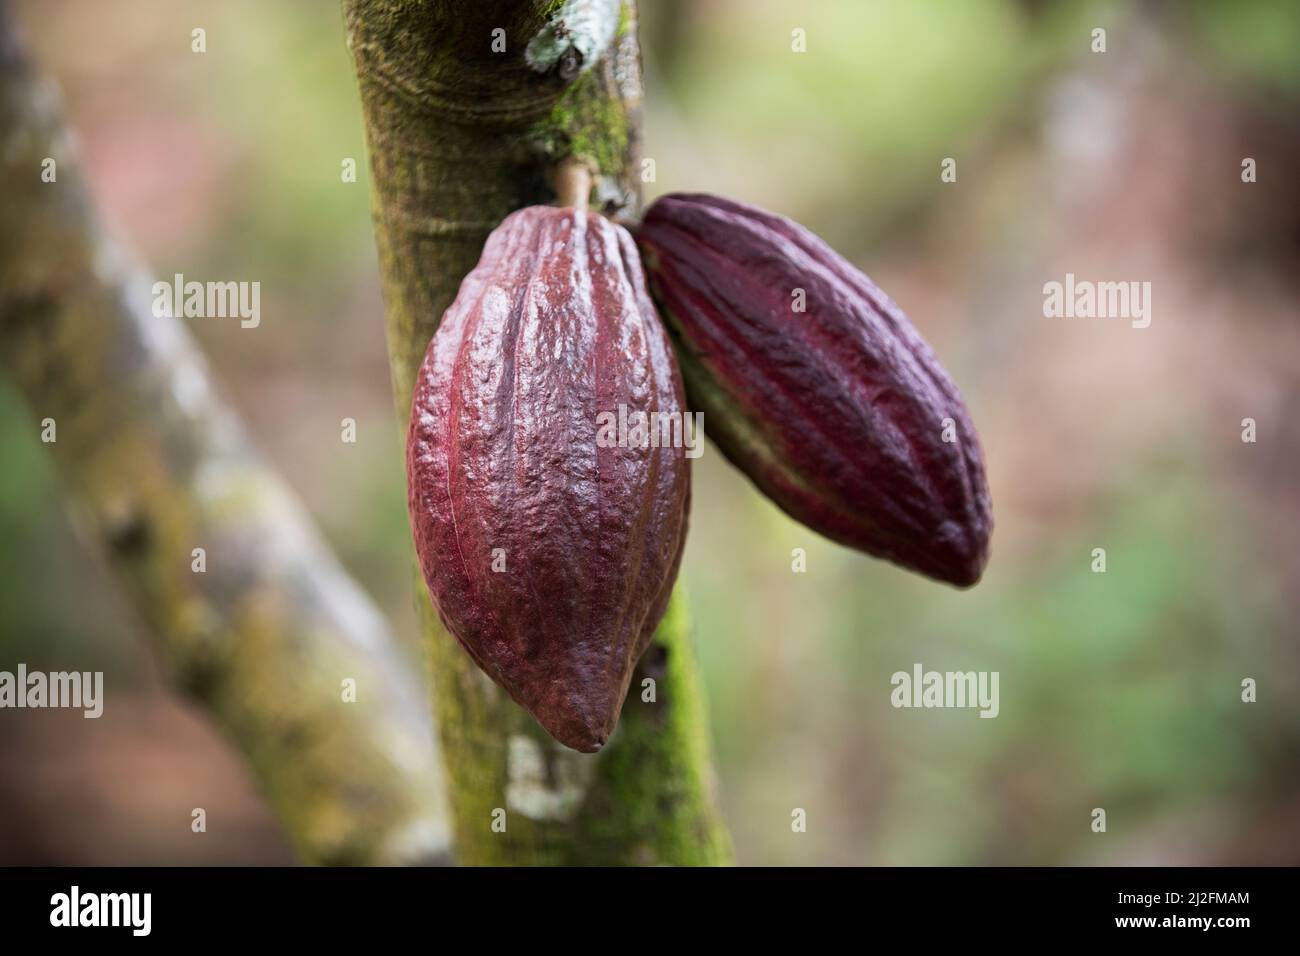 Cocoa bean pods hanging from a tree and ripe for harvest - Mamuju Regency, Sulawesi Island, Indonesia, Asia. Stock Photo